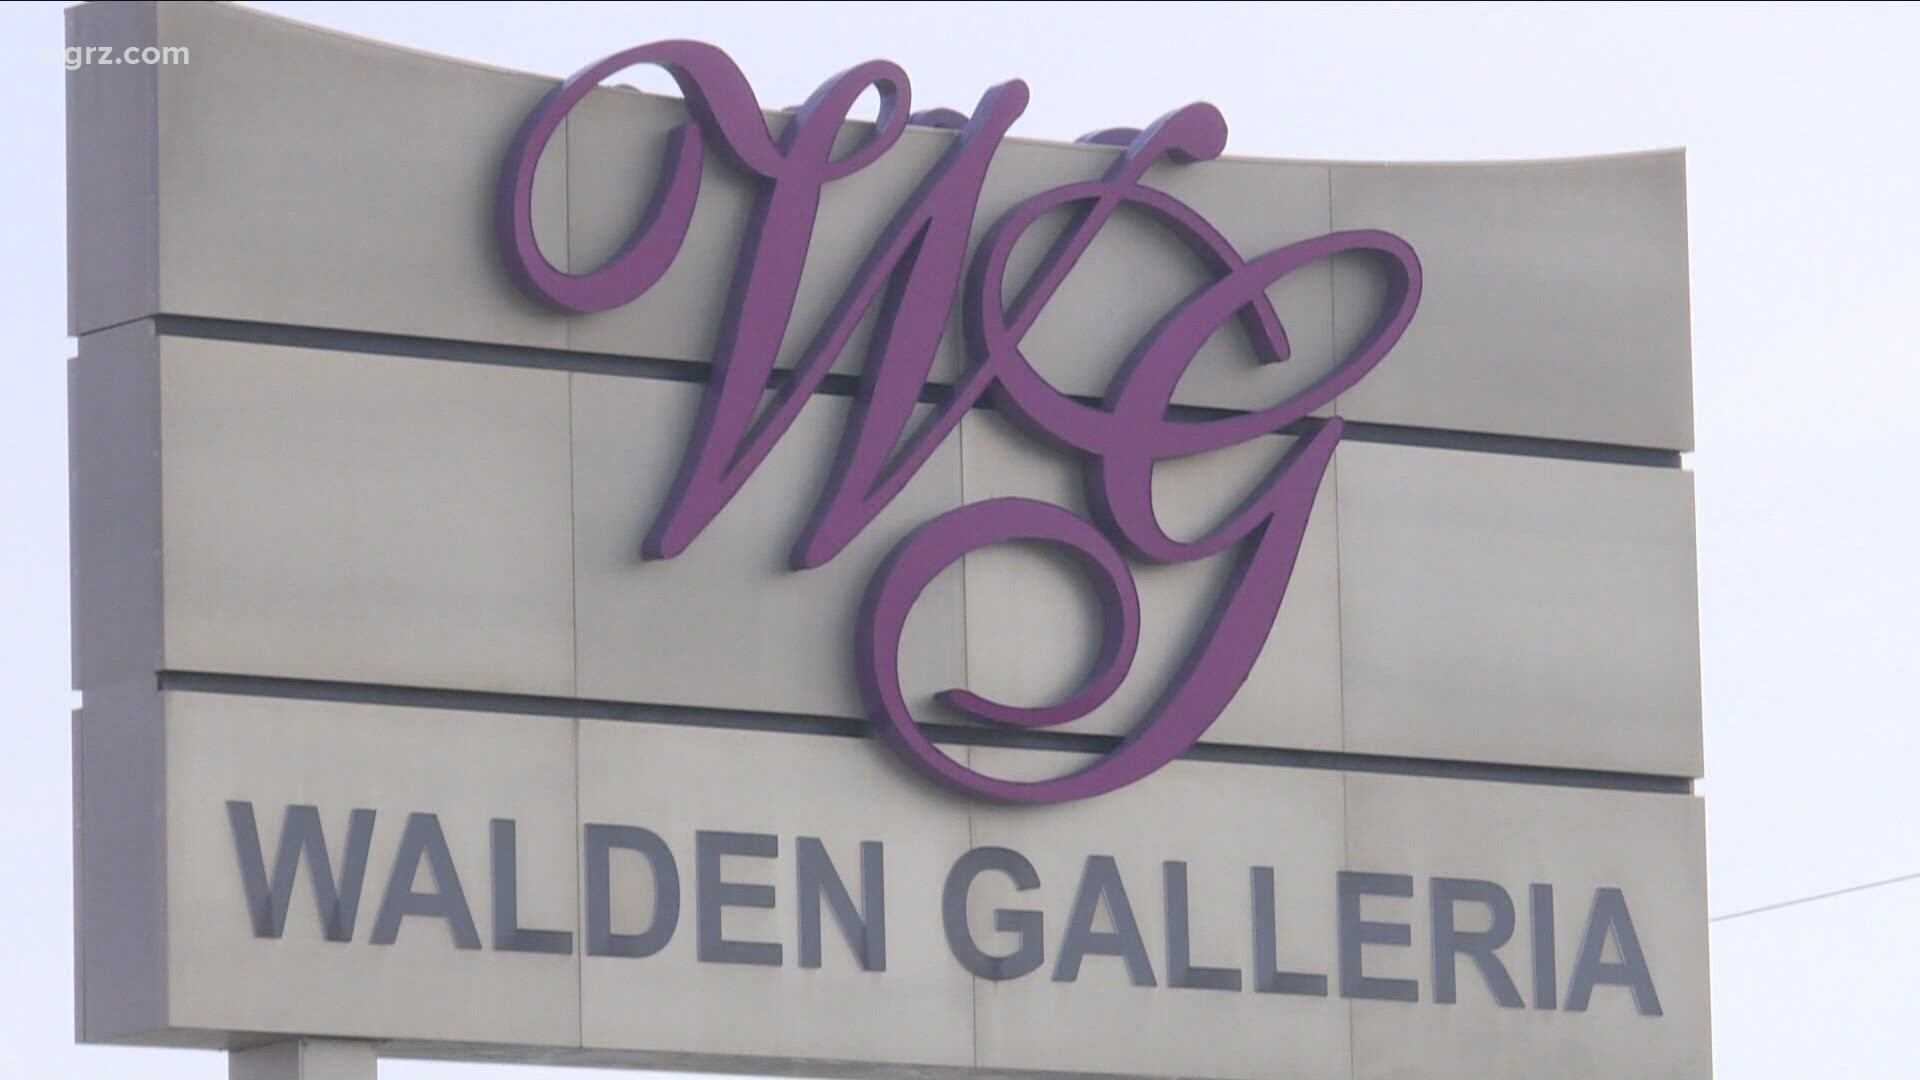 We're still seeking answers from Cheektowaga Police and the management of the Walden Galleria for more information on the incident last night.